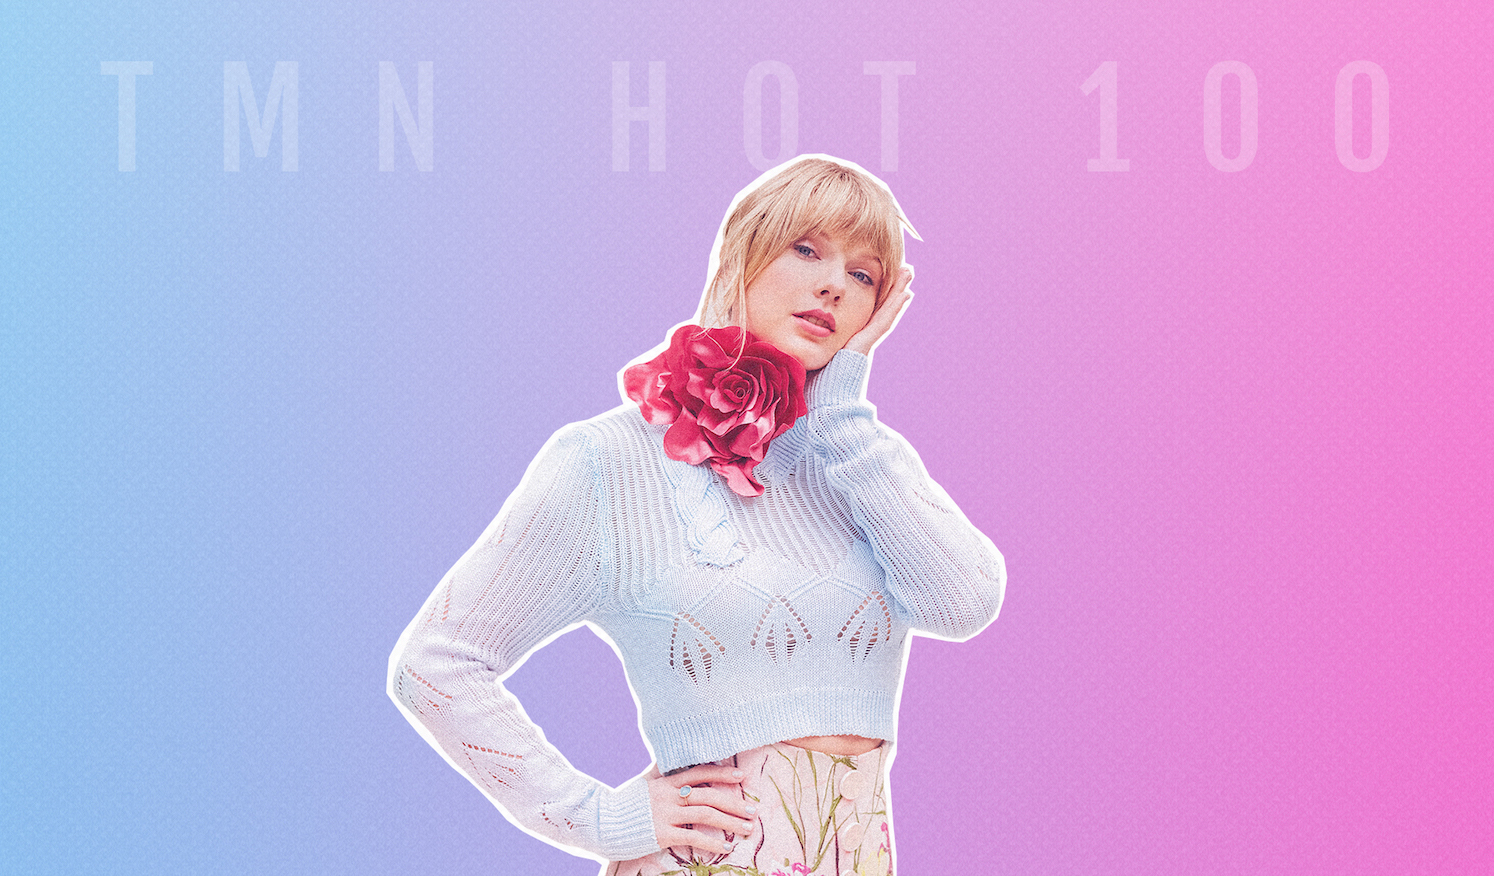 Will Taylor Swift be the first artist to debut at #1 on the TMN Hot 100?